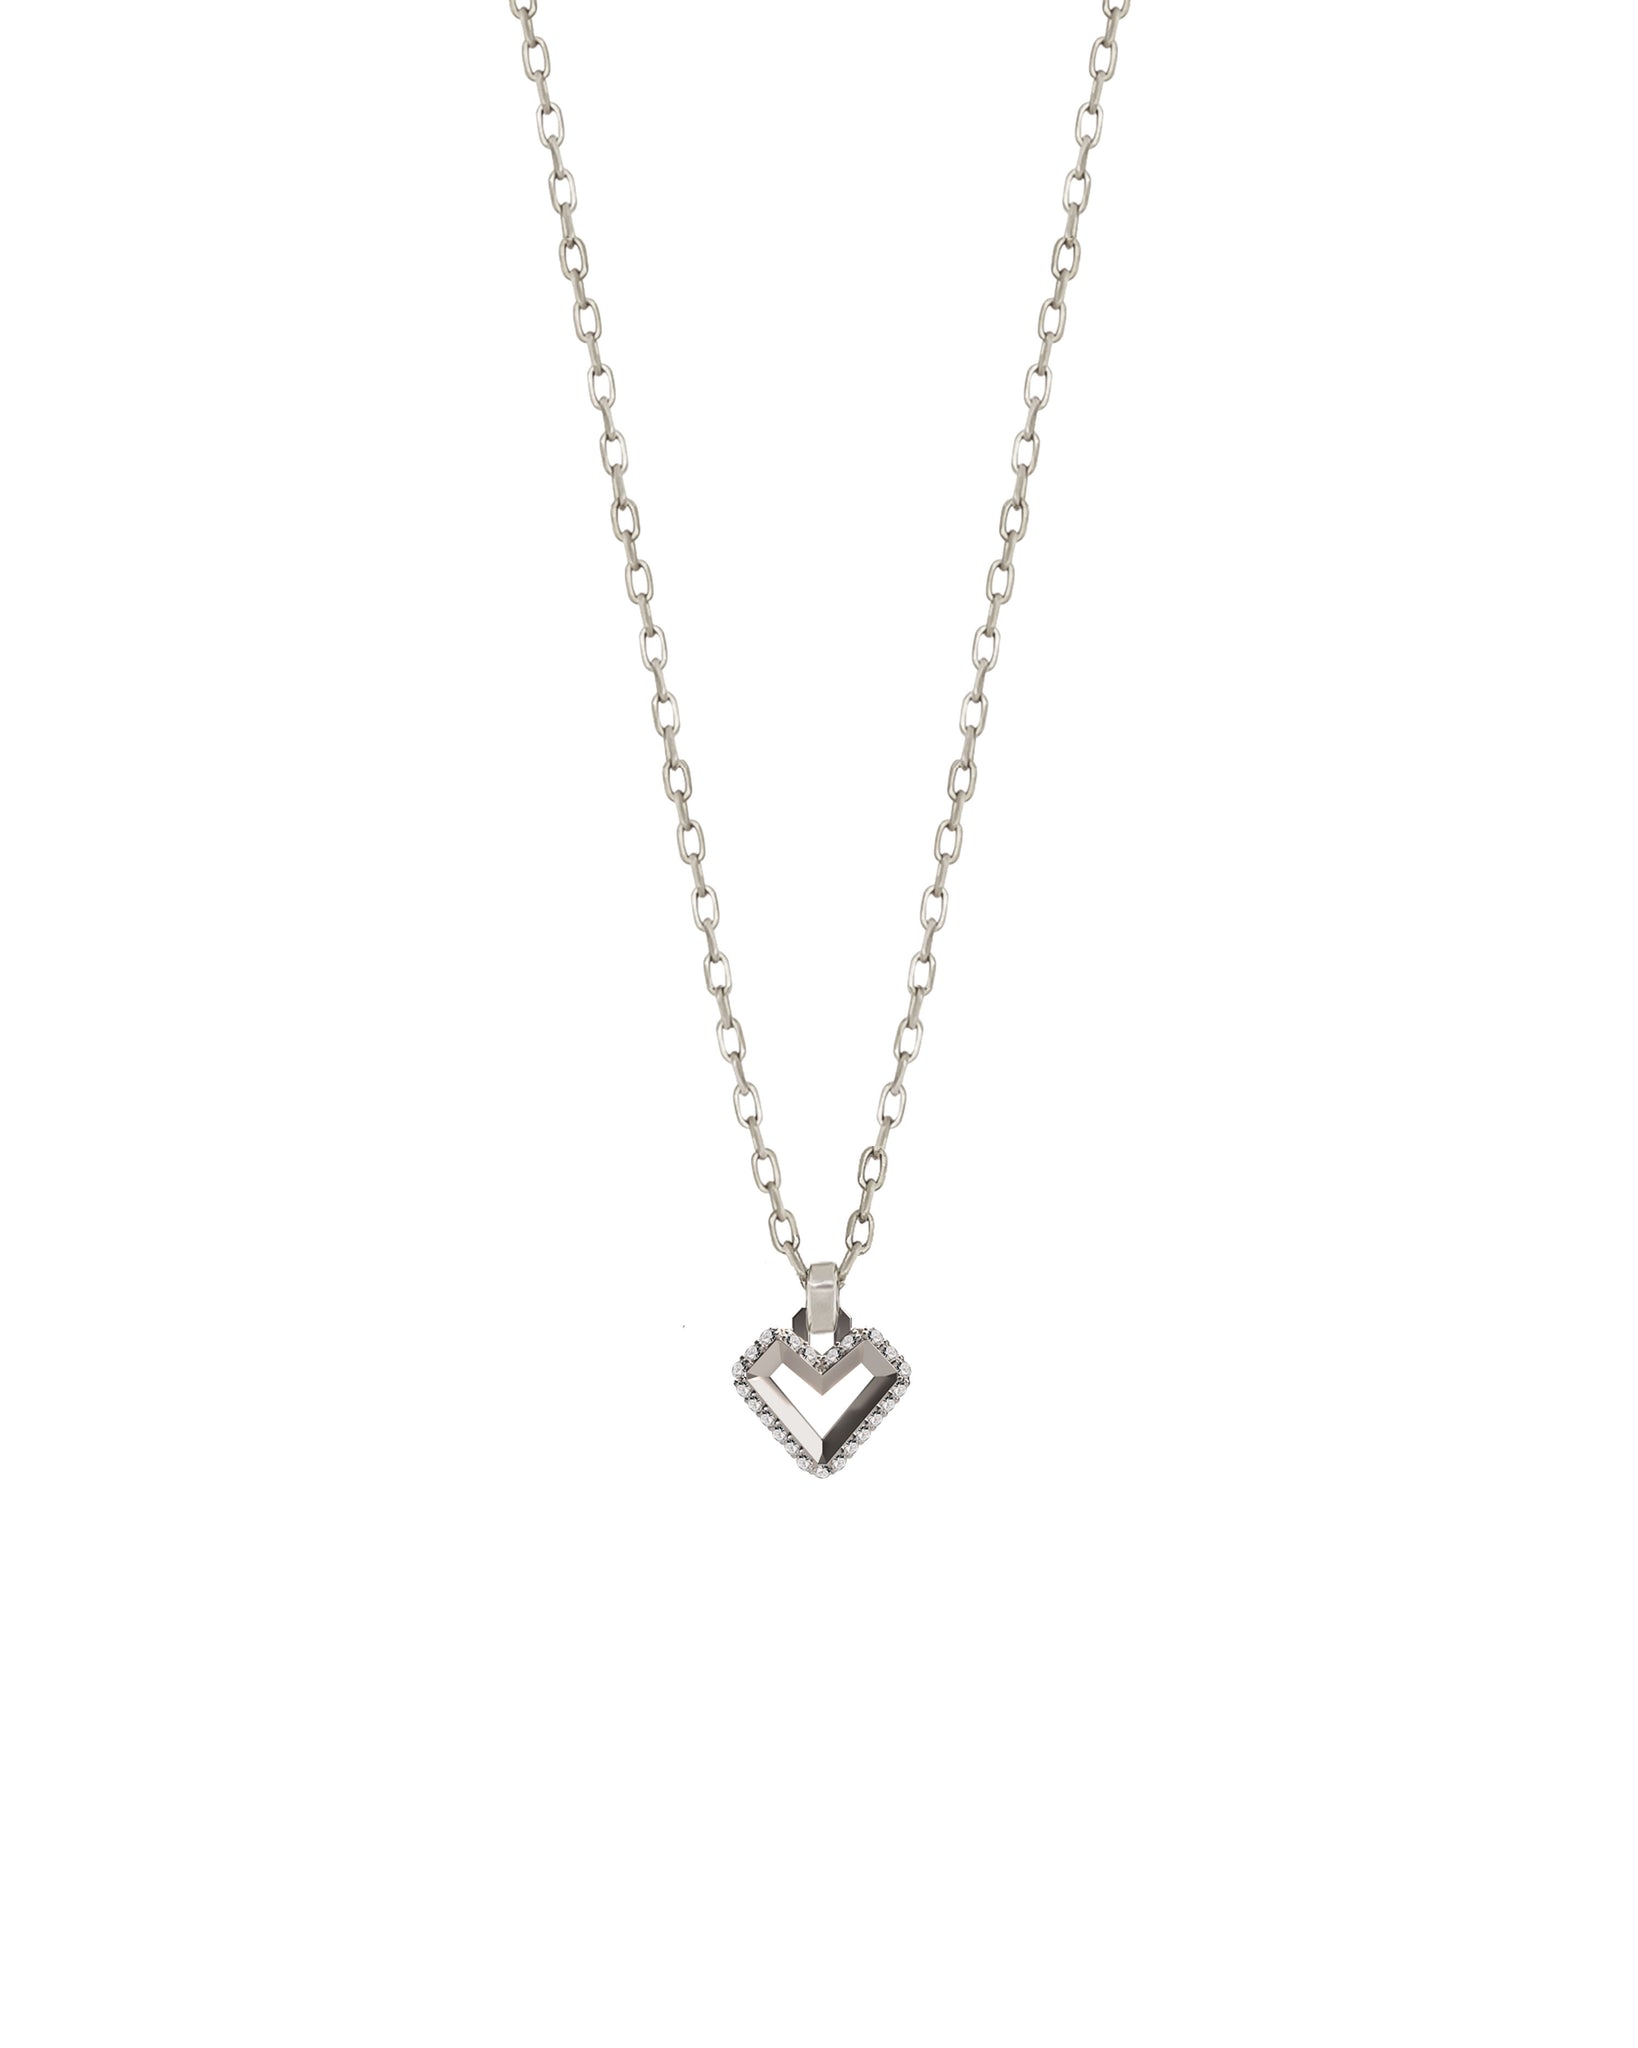 14K White Gold Pave Heart Charm Necklace